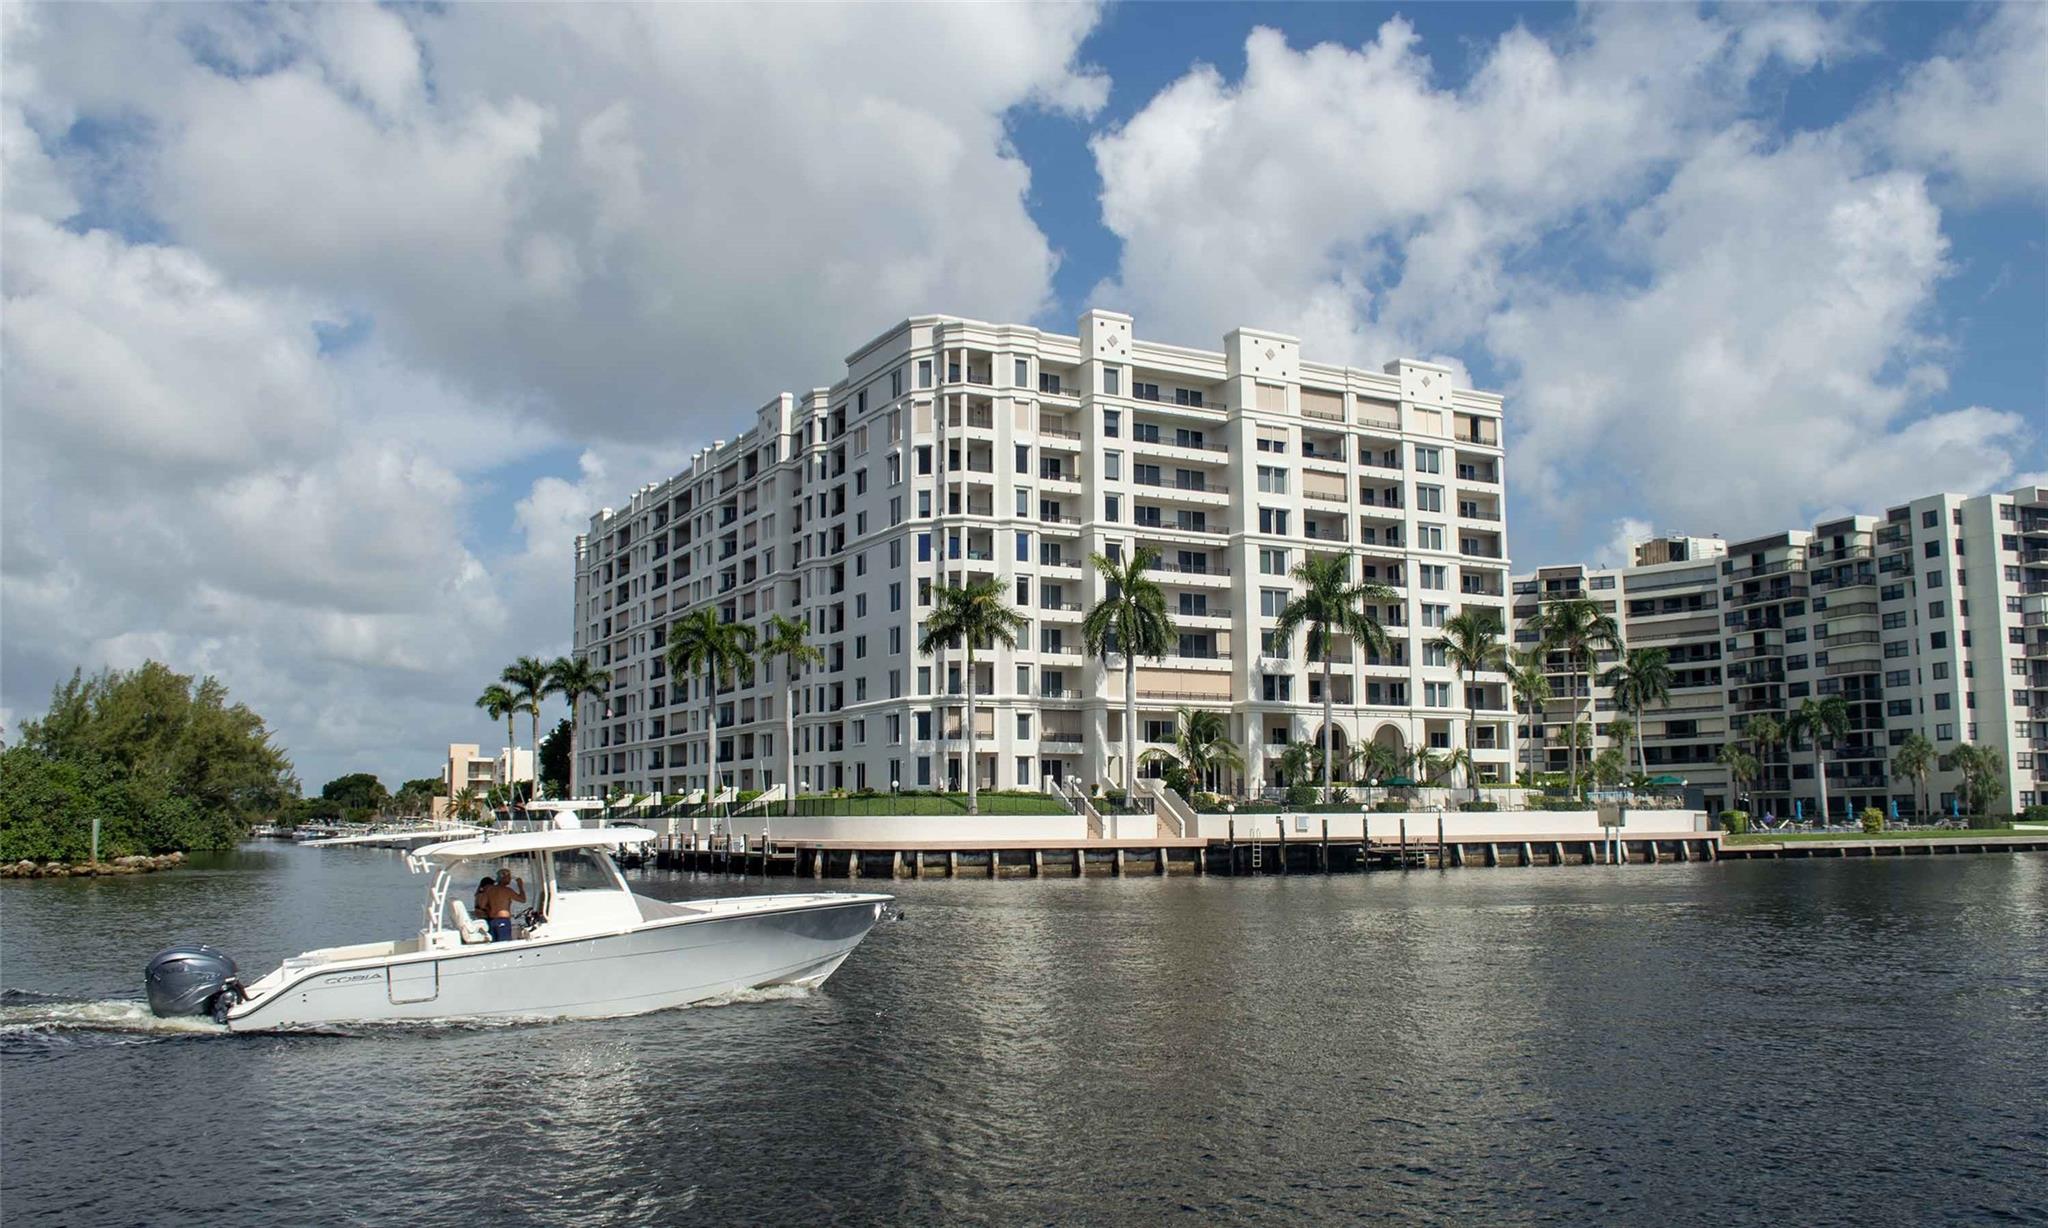 FABULOUS FULL 3 BED 3  BATH UNIT  DIRECTLY ON THE INTRACOASTAL WITH VERY LARGE TERRACE FROM WHICH TO WATCH THE DAILY BOAT SHOW. MOST IMPORTANTLY THIS IS A FINANCIALLY STRONG BUILDING, NO PROBLEMS HERE AND LOW MAINTENANCE. UNIT IS IN MOVE IN CONDITION AND BENEFITS FROM 2 UNDERGROUND PARKING SPACES. TERRACE ACCESS FROM BOTH LIVING ROOM AND MAIN BEDROOM. ONE NEEDS TO SEE THE UNIT TO APPRECIATE IT. BUILDING IS WELL MANAGED WITH FULL AMENITIES INCLUDING 24 HR. SECURITY, COMMUNIAL DOCK, GREAT POOL AREA DIRECTLY ON THE INTRACOASTAL WITH HOT TUB AND GRILLING AREA, CARD ROOM, KITCHEN FACILITIES AND BEAUTIFUL PARTY ROOM. YOU CAN EVEN BRING YOUR PET. THE LOCATION IS OUTSTANDING , COME SEE IT NOW!!